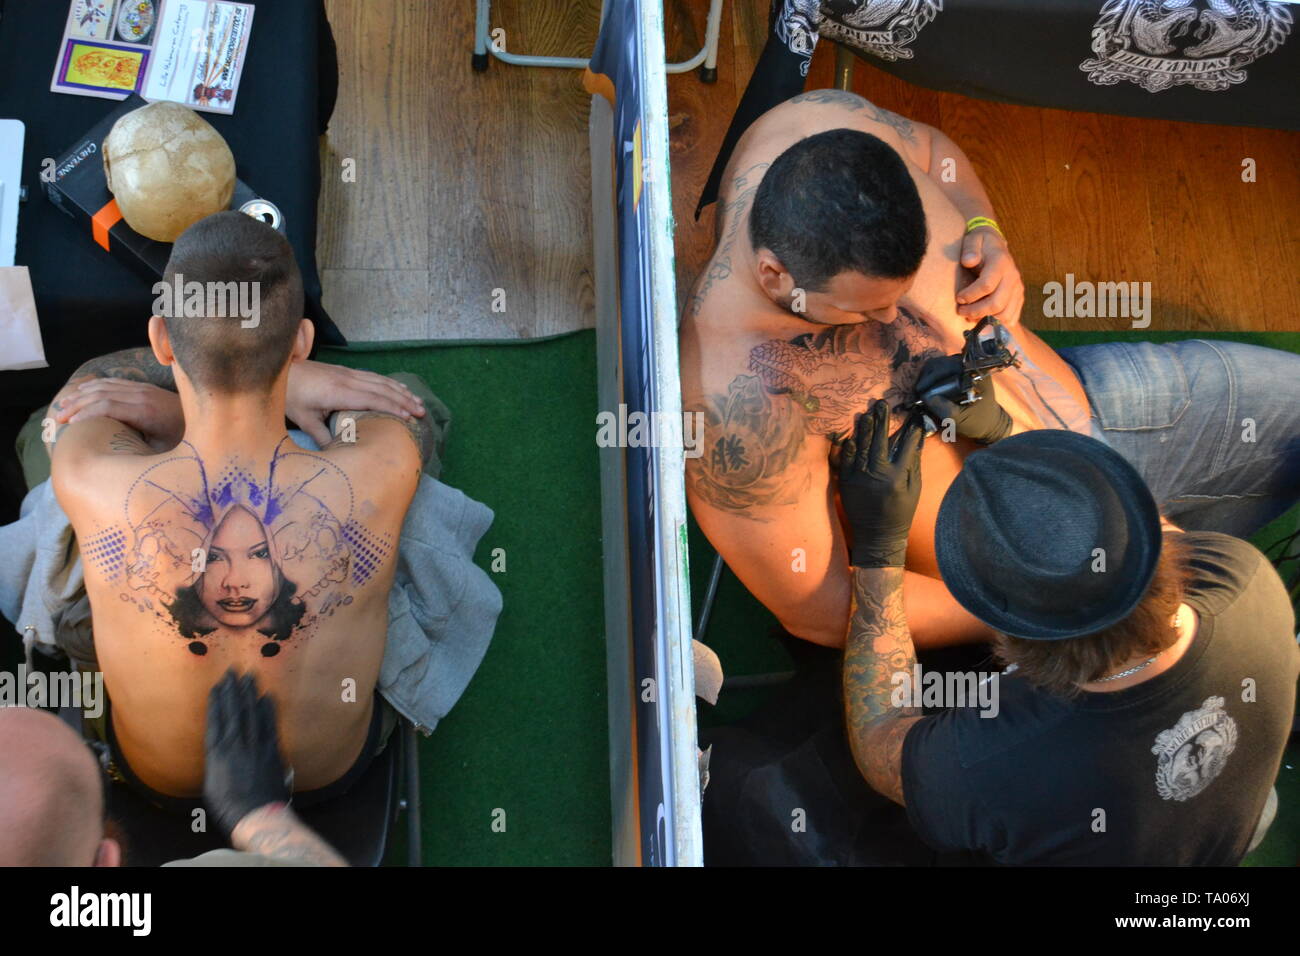 Live tattooing at a Tattoo convention in Stockholm Stock Photo